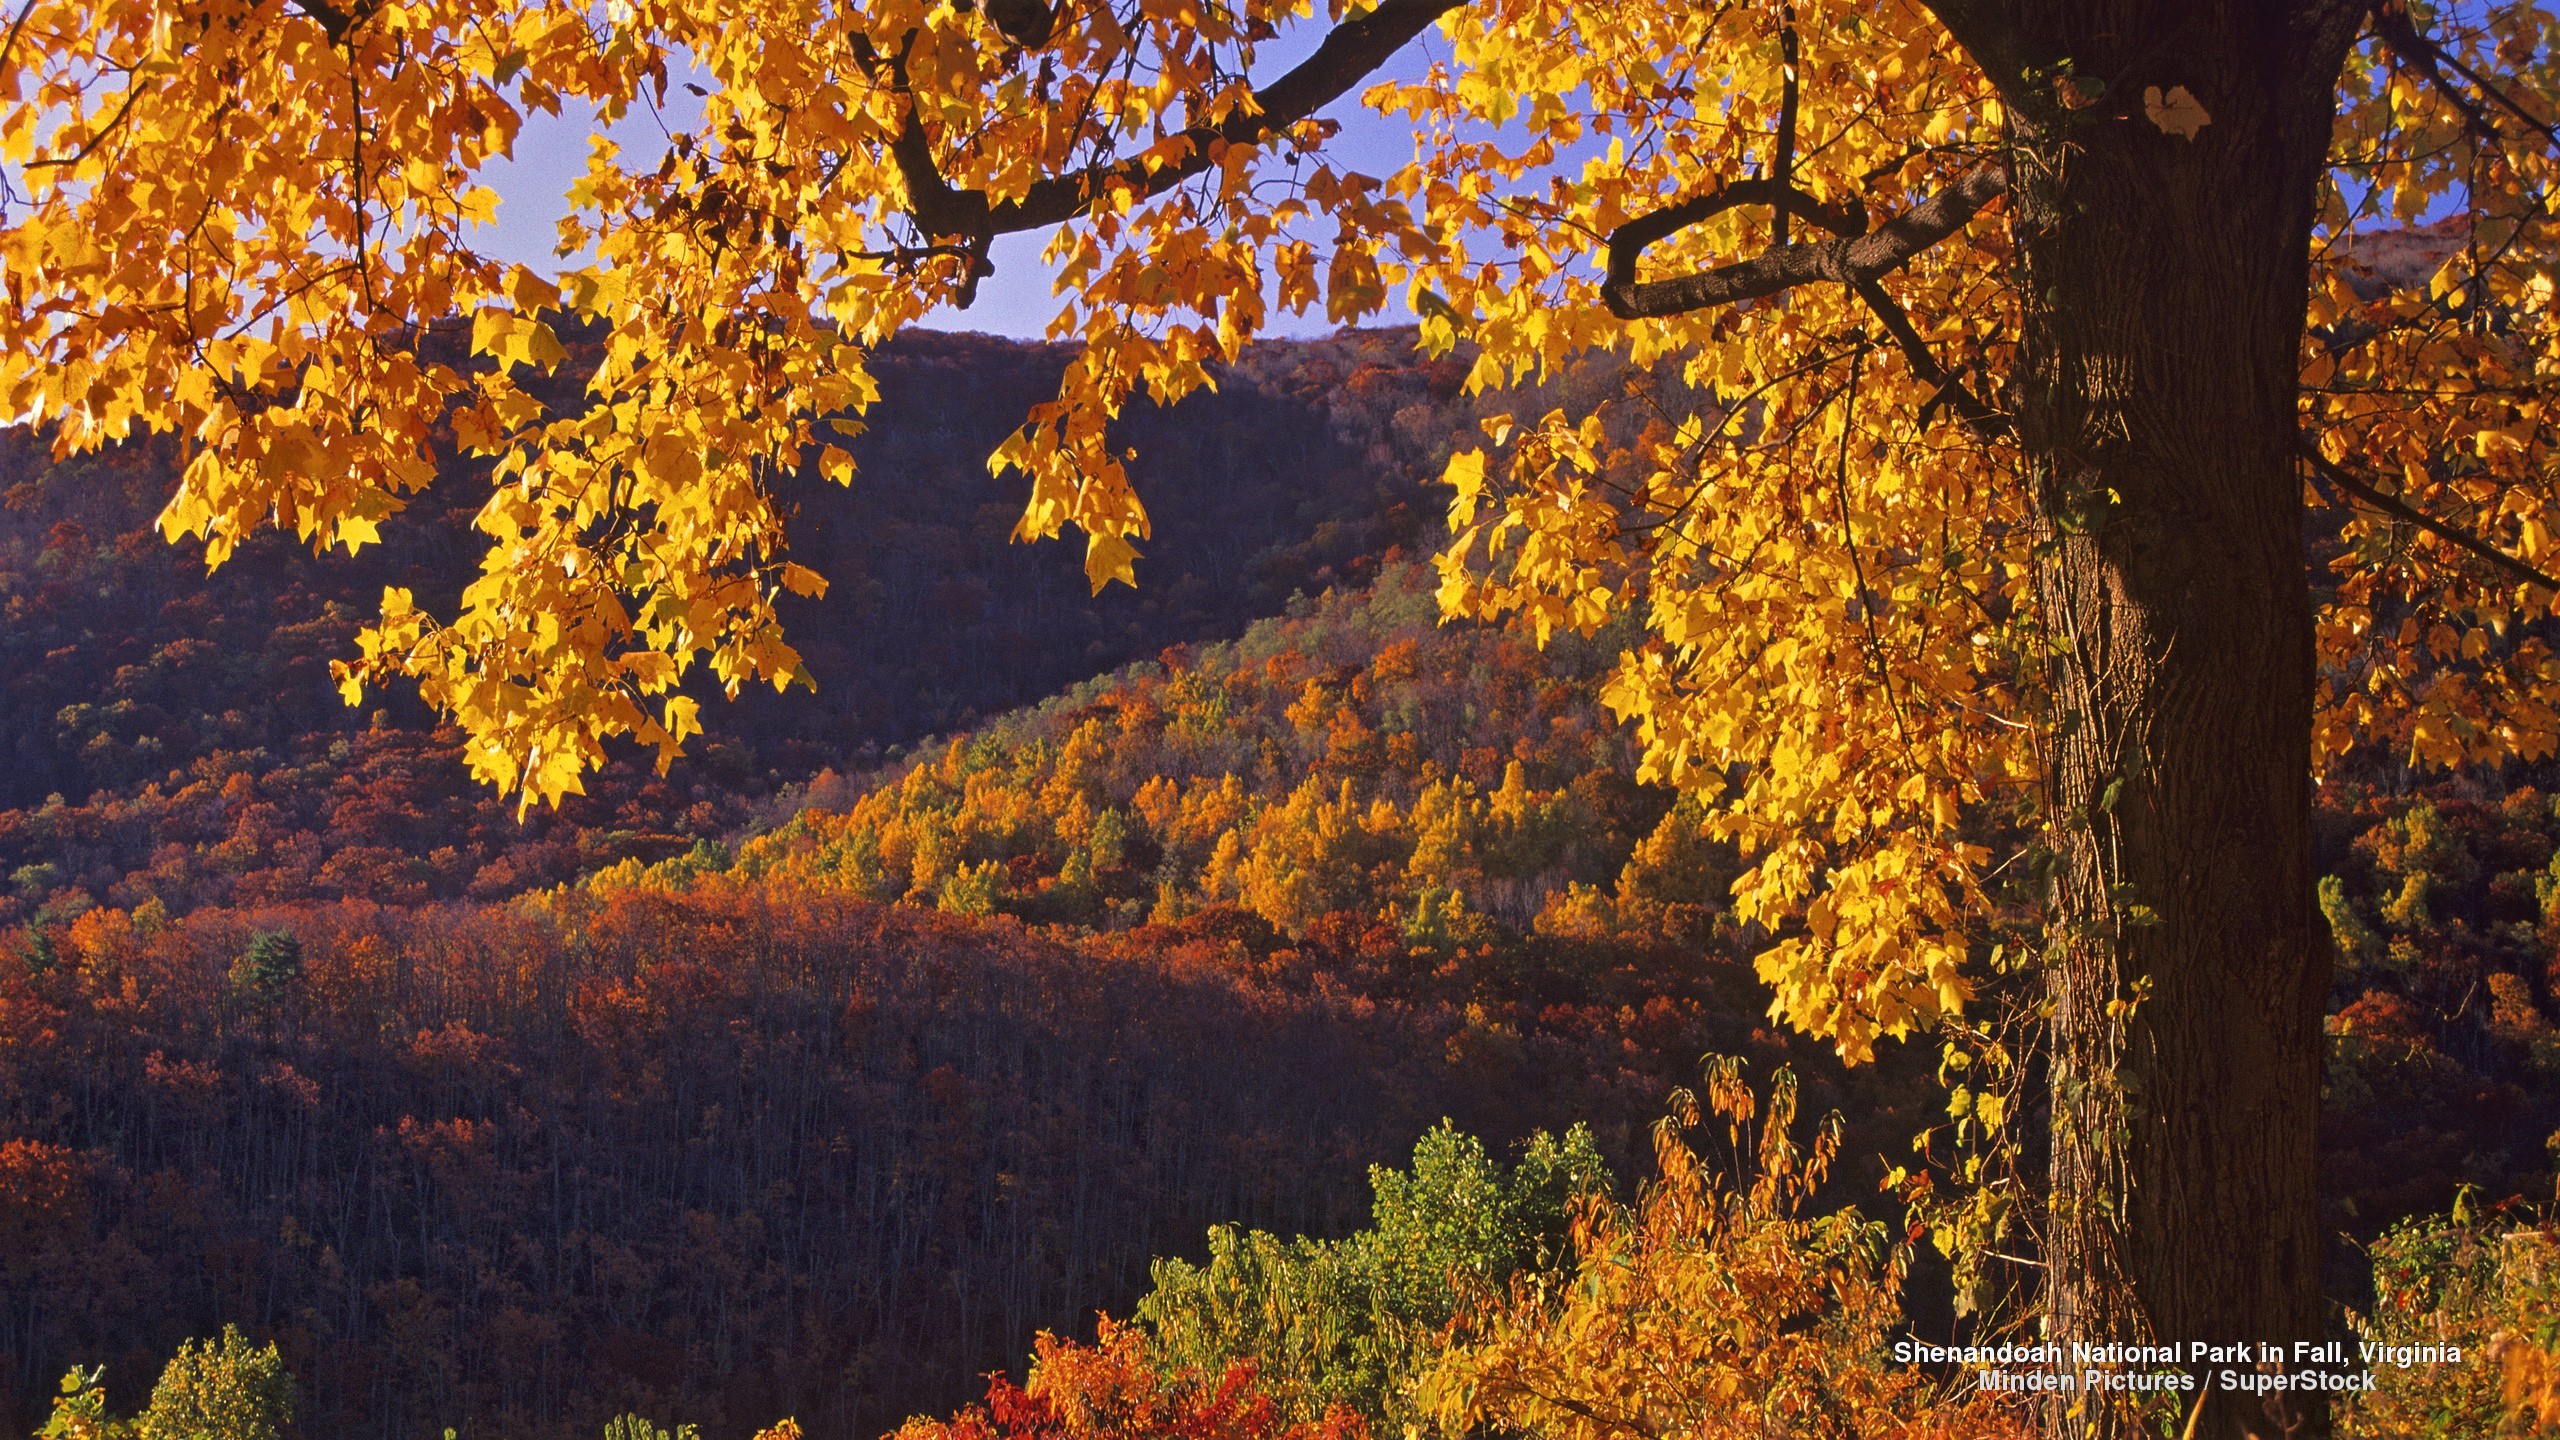 Earth Fall Foliage Forest Landscape Mountain Shenandoah National Park Virginia State In Usa 2560x1440